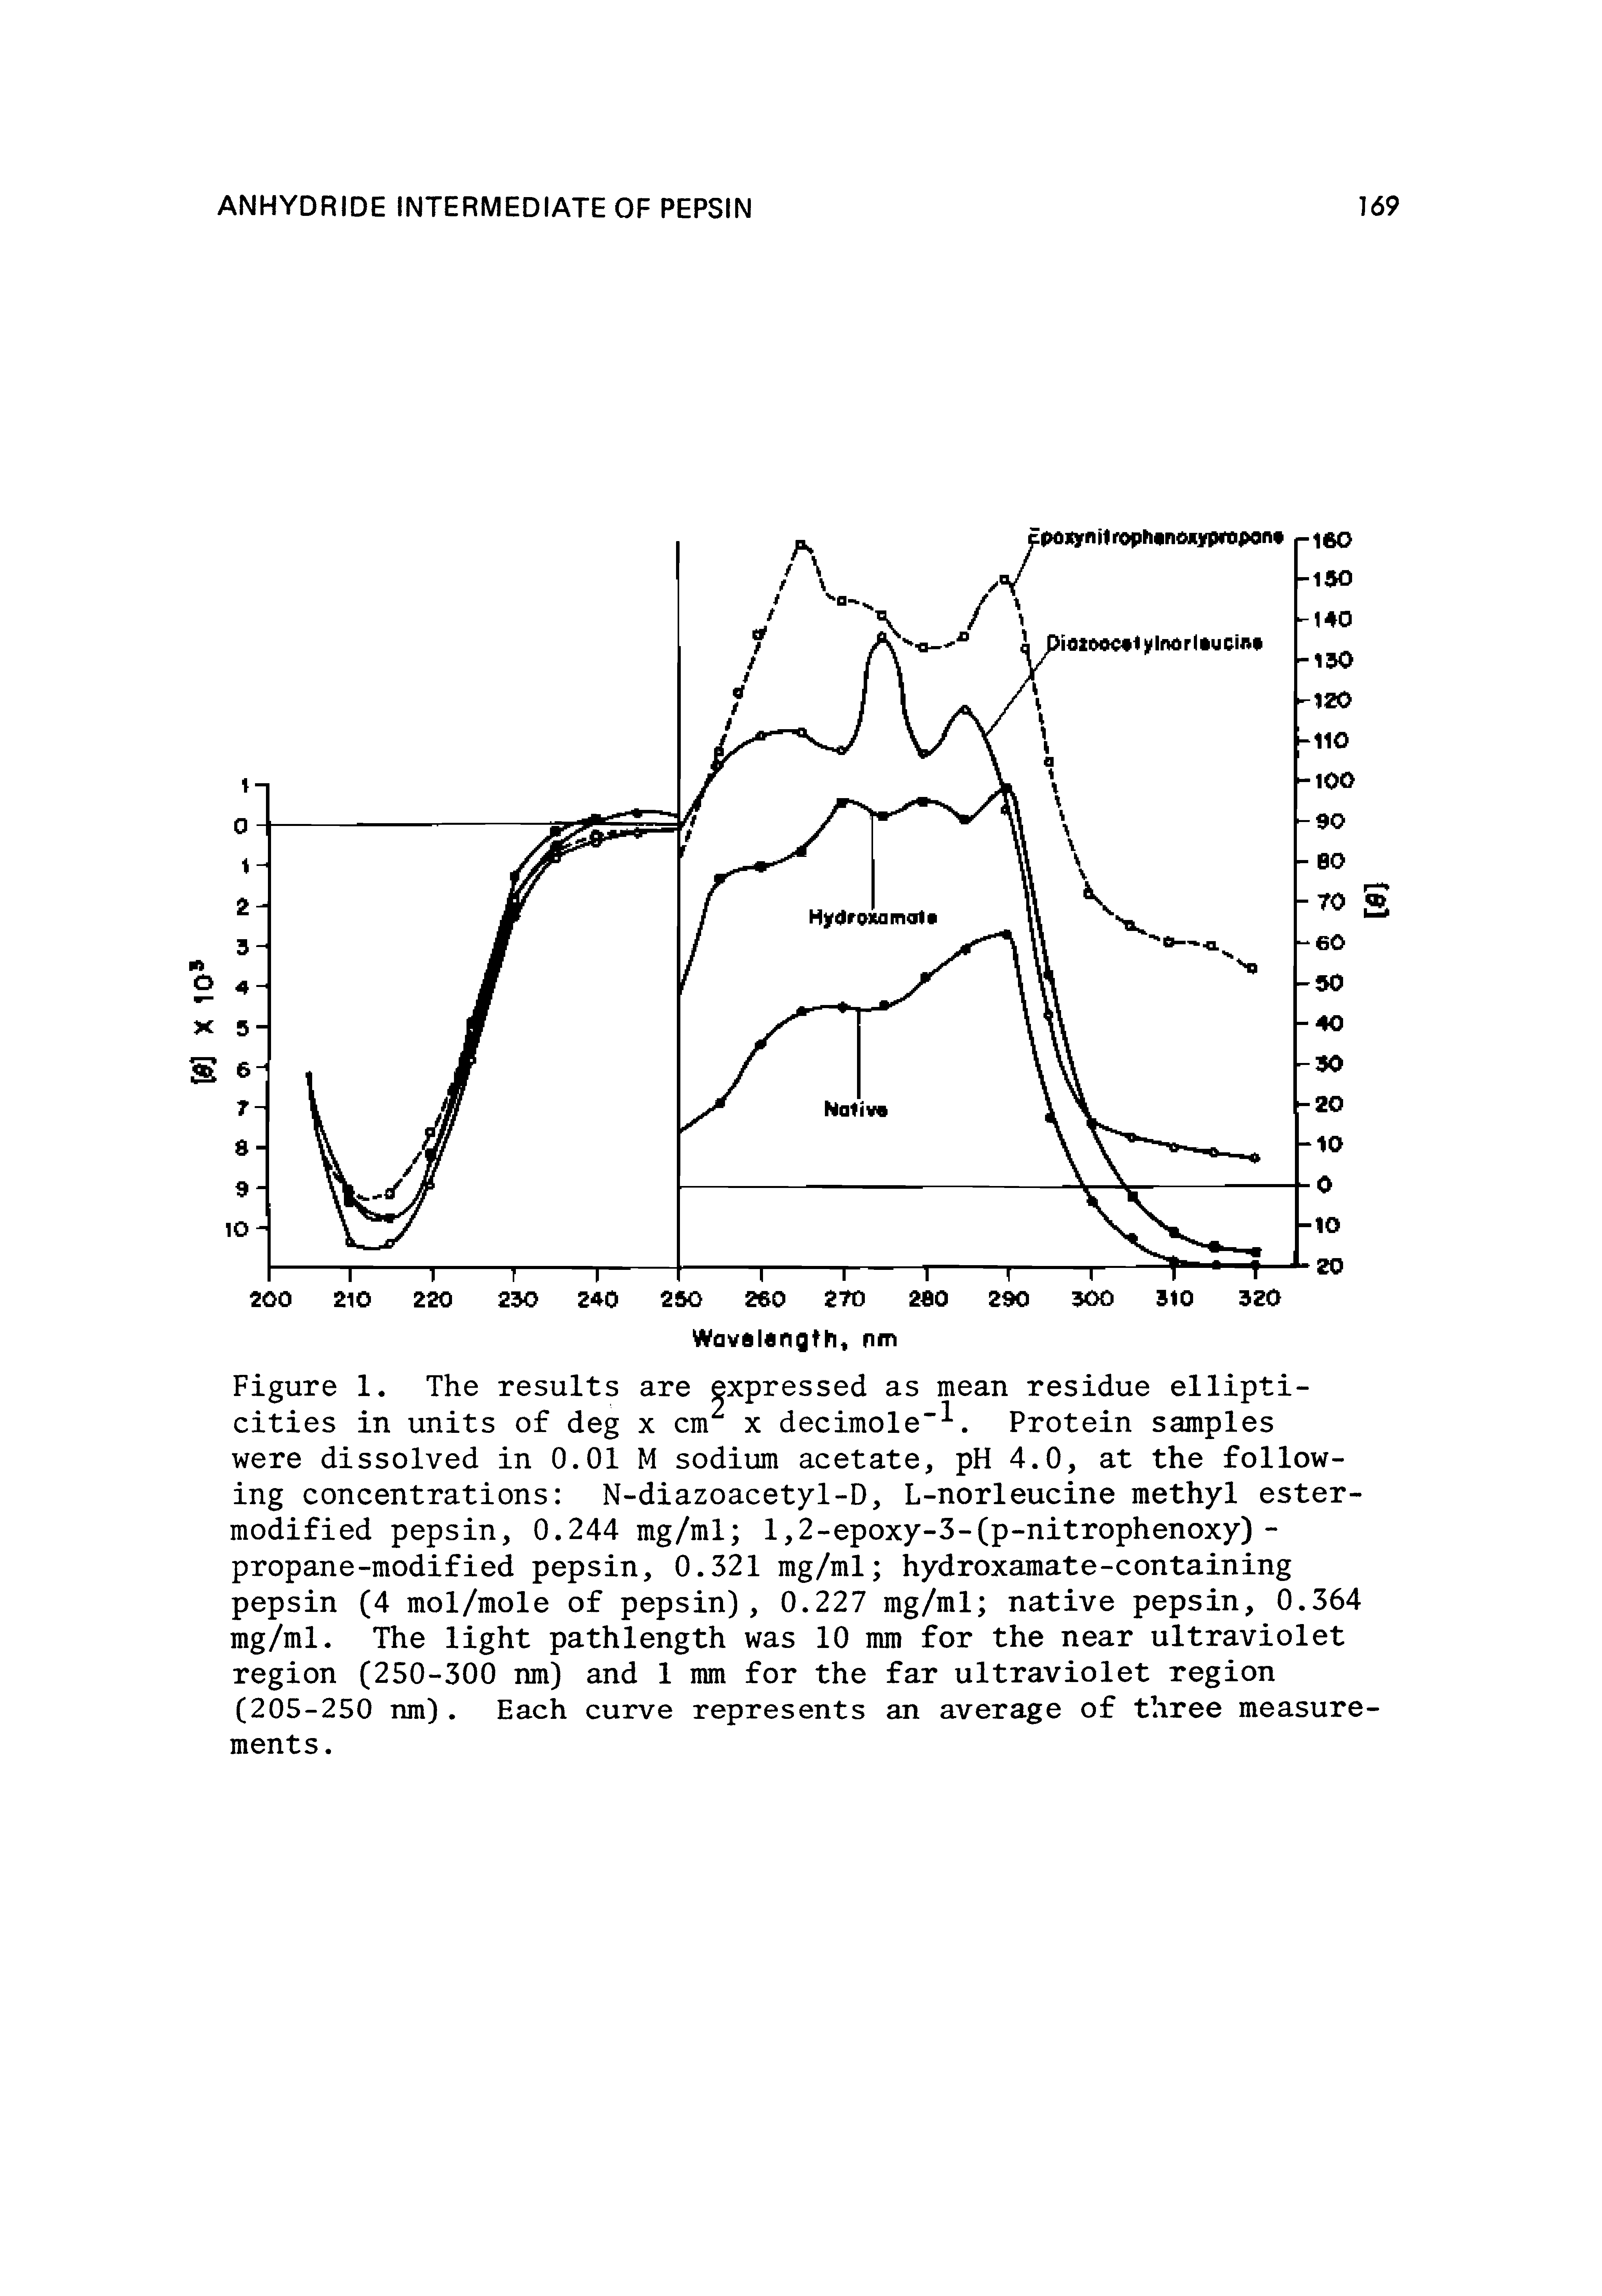 Figure 1. The results are expressed as mean residue ellipti-cities in units of deg x cm x decimole . Protein samples were dissolved in 0.01 M sodium acetate, pH 4.0, at the following concentrations N-diazoacetyl-D, L-norleucine methyl ester-modified pepsin, 0.244 mg/ml l,2-epoxy-3-(p-nitrophenoxy)-propane-modified pepsin, 0.321 mg/ml hydroxamate-containing pepsin (4 mol/mole of pepsin), 0.227 mg/ml native pepsin, 0.364 mg/ml. The light pathlength was 10 mm for the near ultraviolet region (250-300 nm) and 1 mm for the far ultraviolet region (205-250 nm). Each curve represents an average of three measurements.